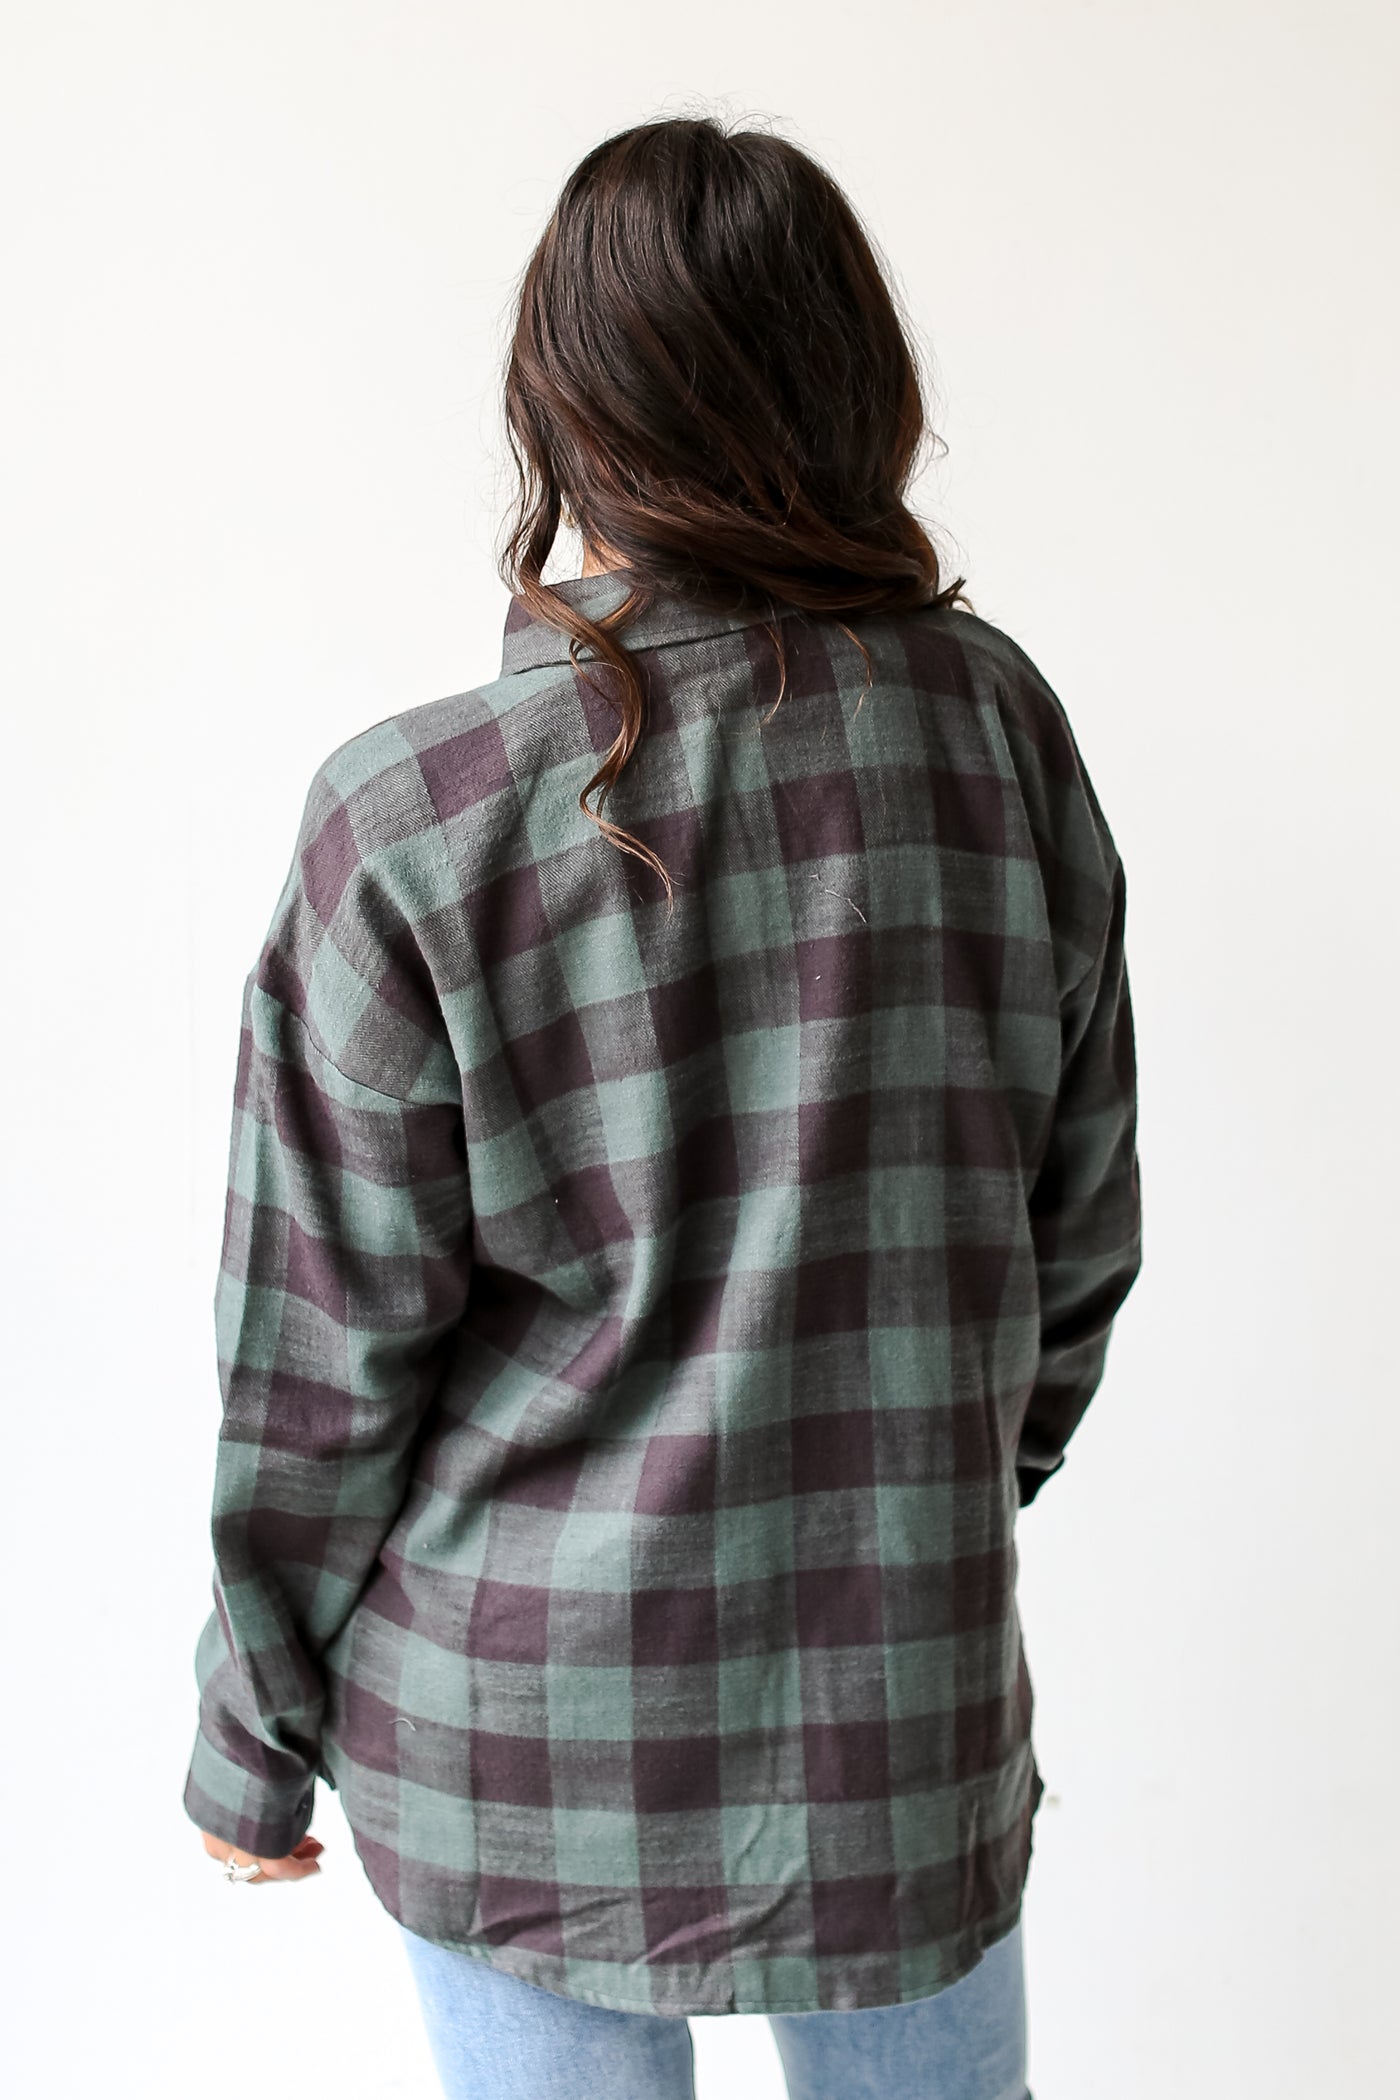 green Plaid Flannel back view